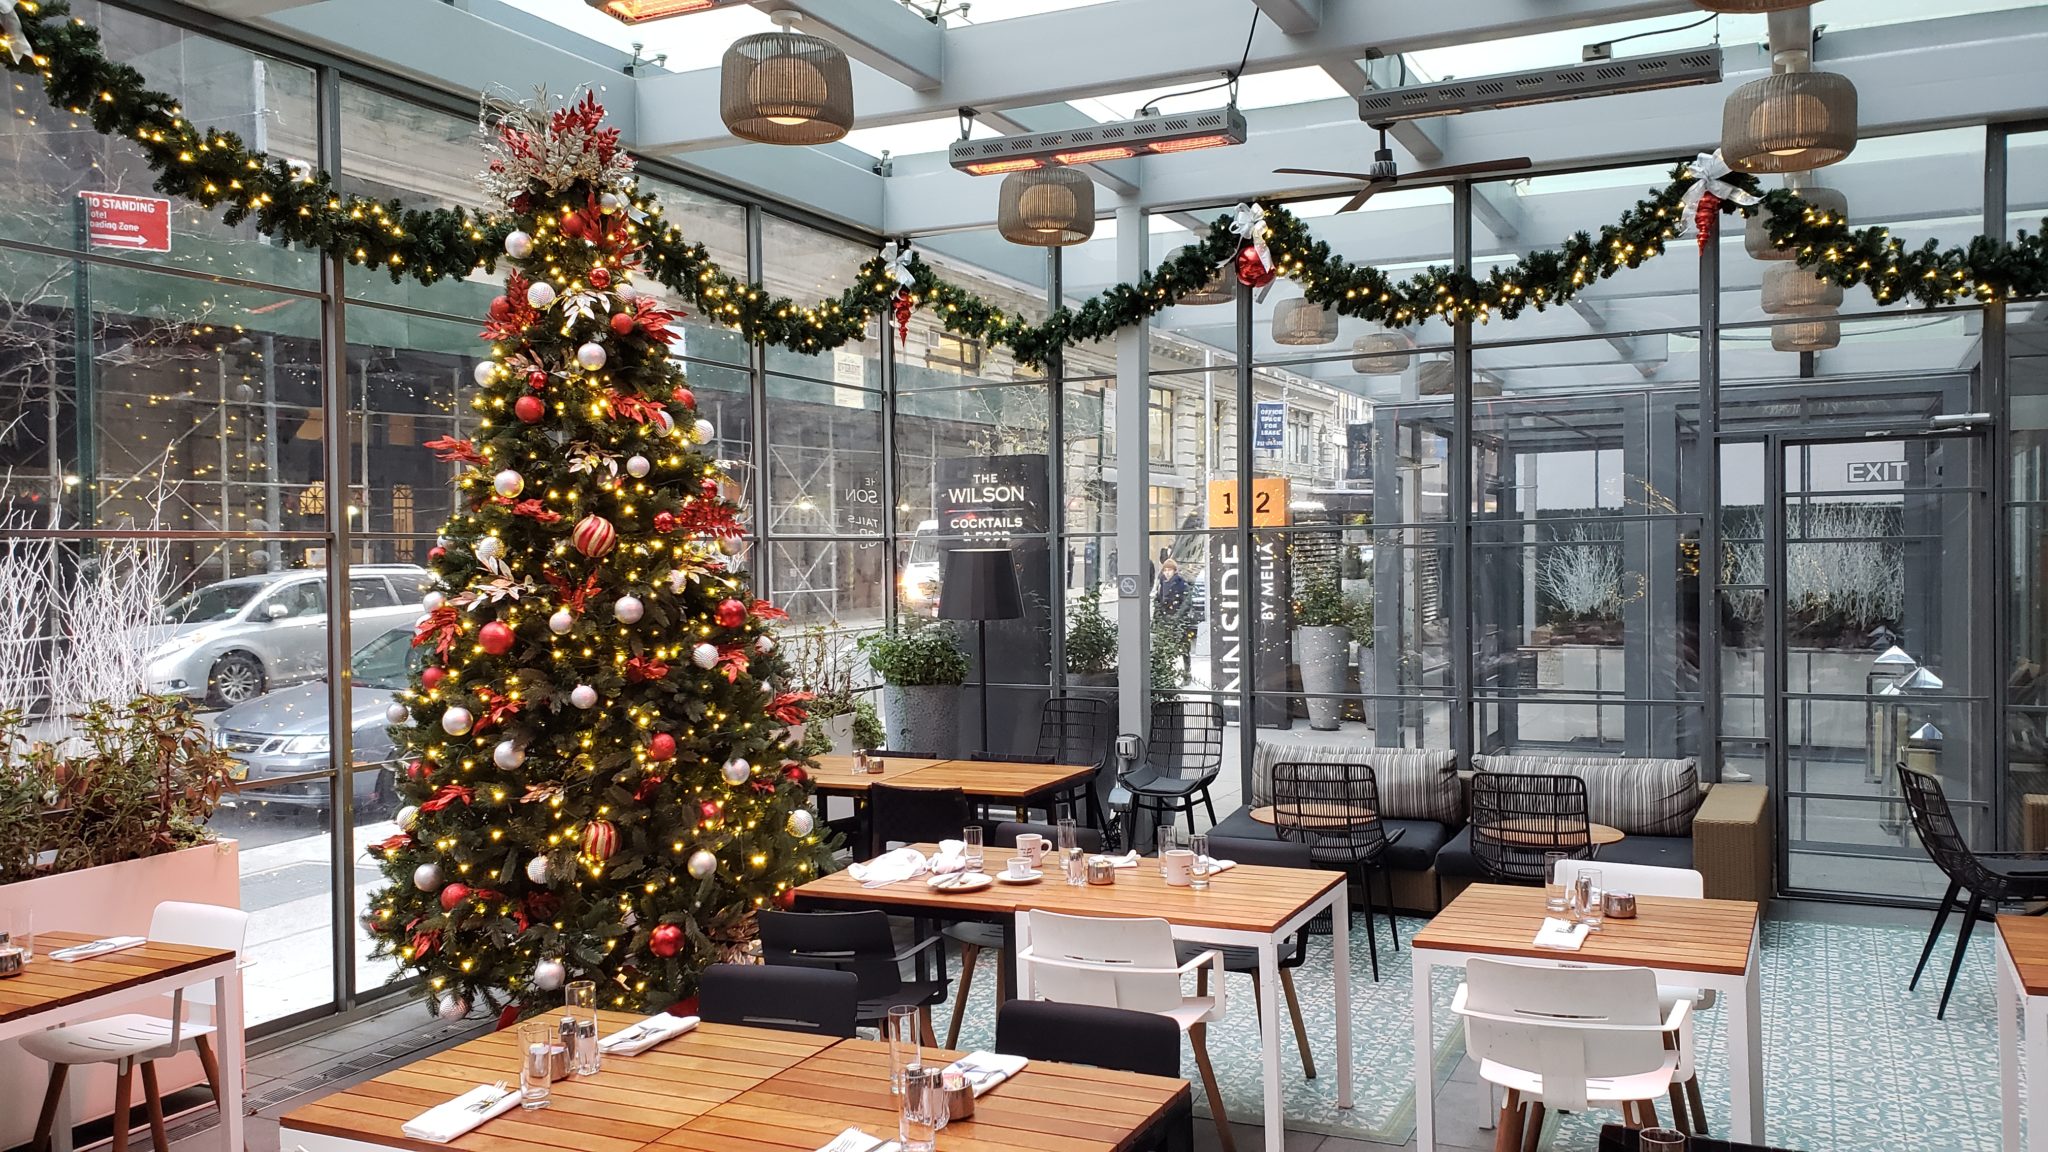 Connect with Neave Decor for Restaurant Holiday Decor Services in NYC Today!